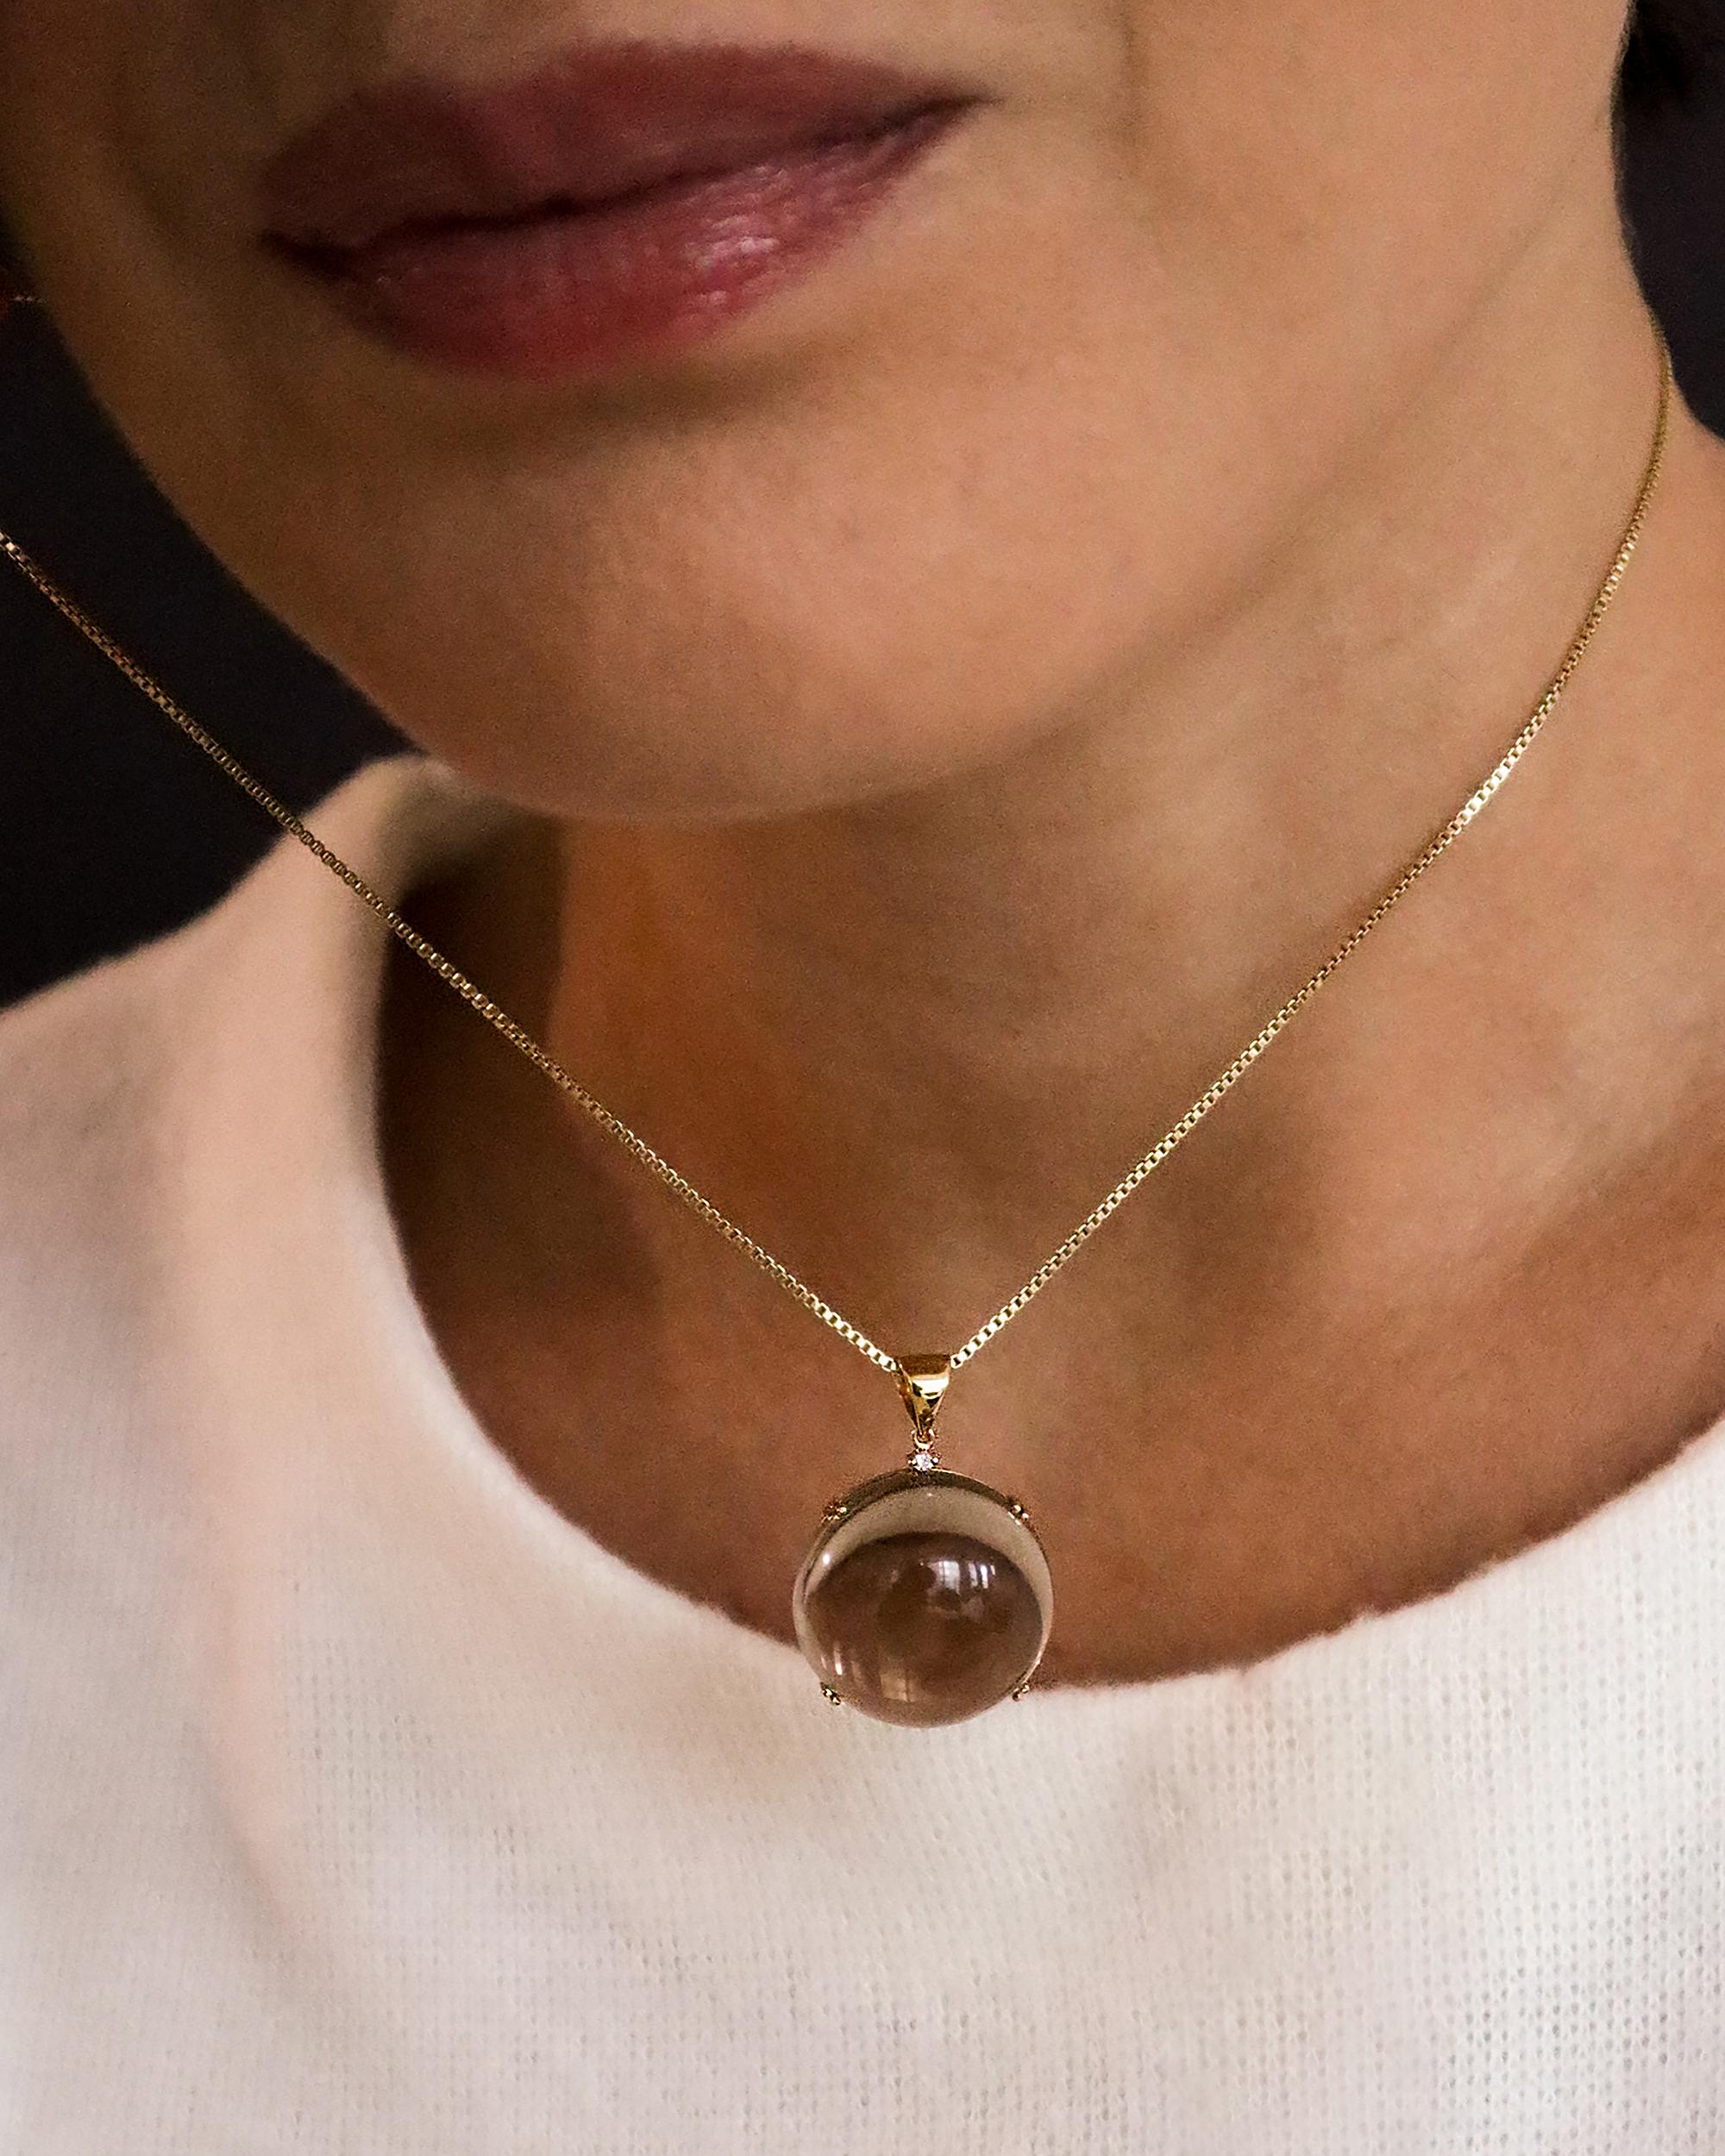 A simple and elegant round pendant featuring a stunning smoky quartz gemstone and a diamond.

Compatible with most chains.

Materials:

- 18k solid gold pendant

- 1 diamond of 1.5mm G color, VS-2 clarity

- 1 natural Brazilian smoky quartz round